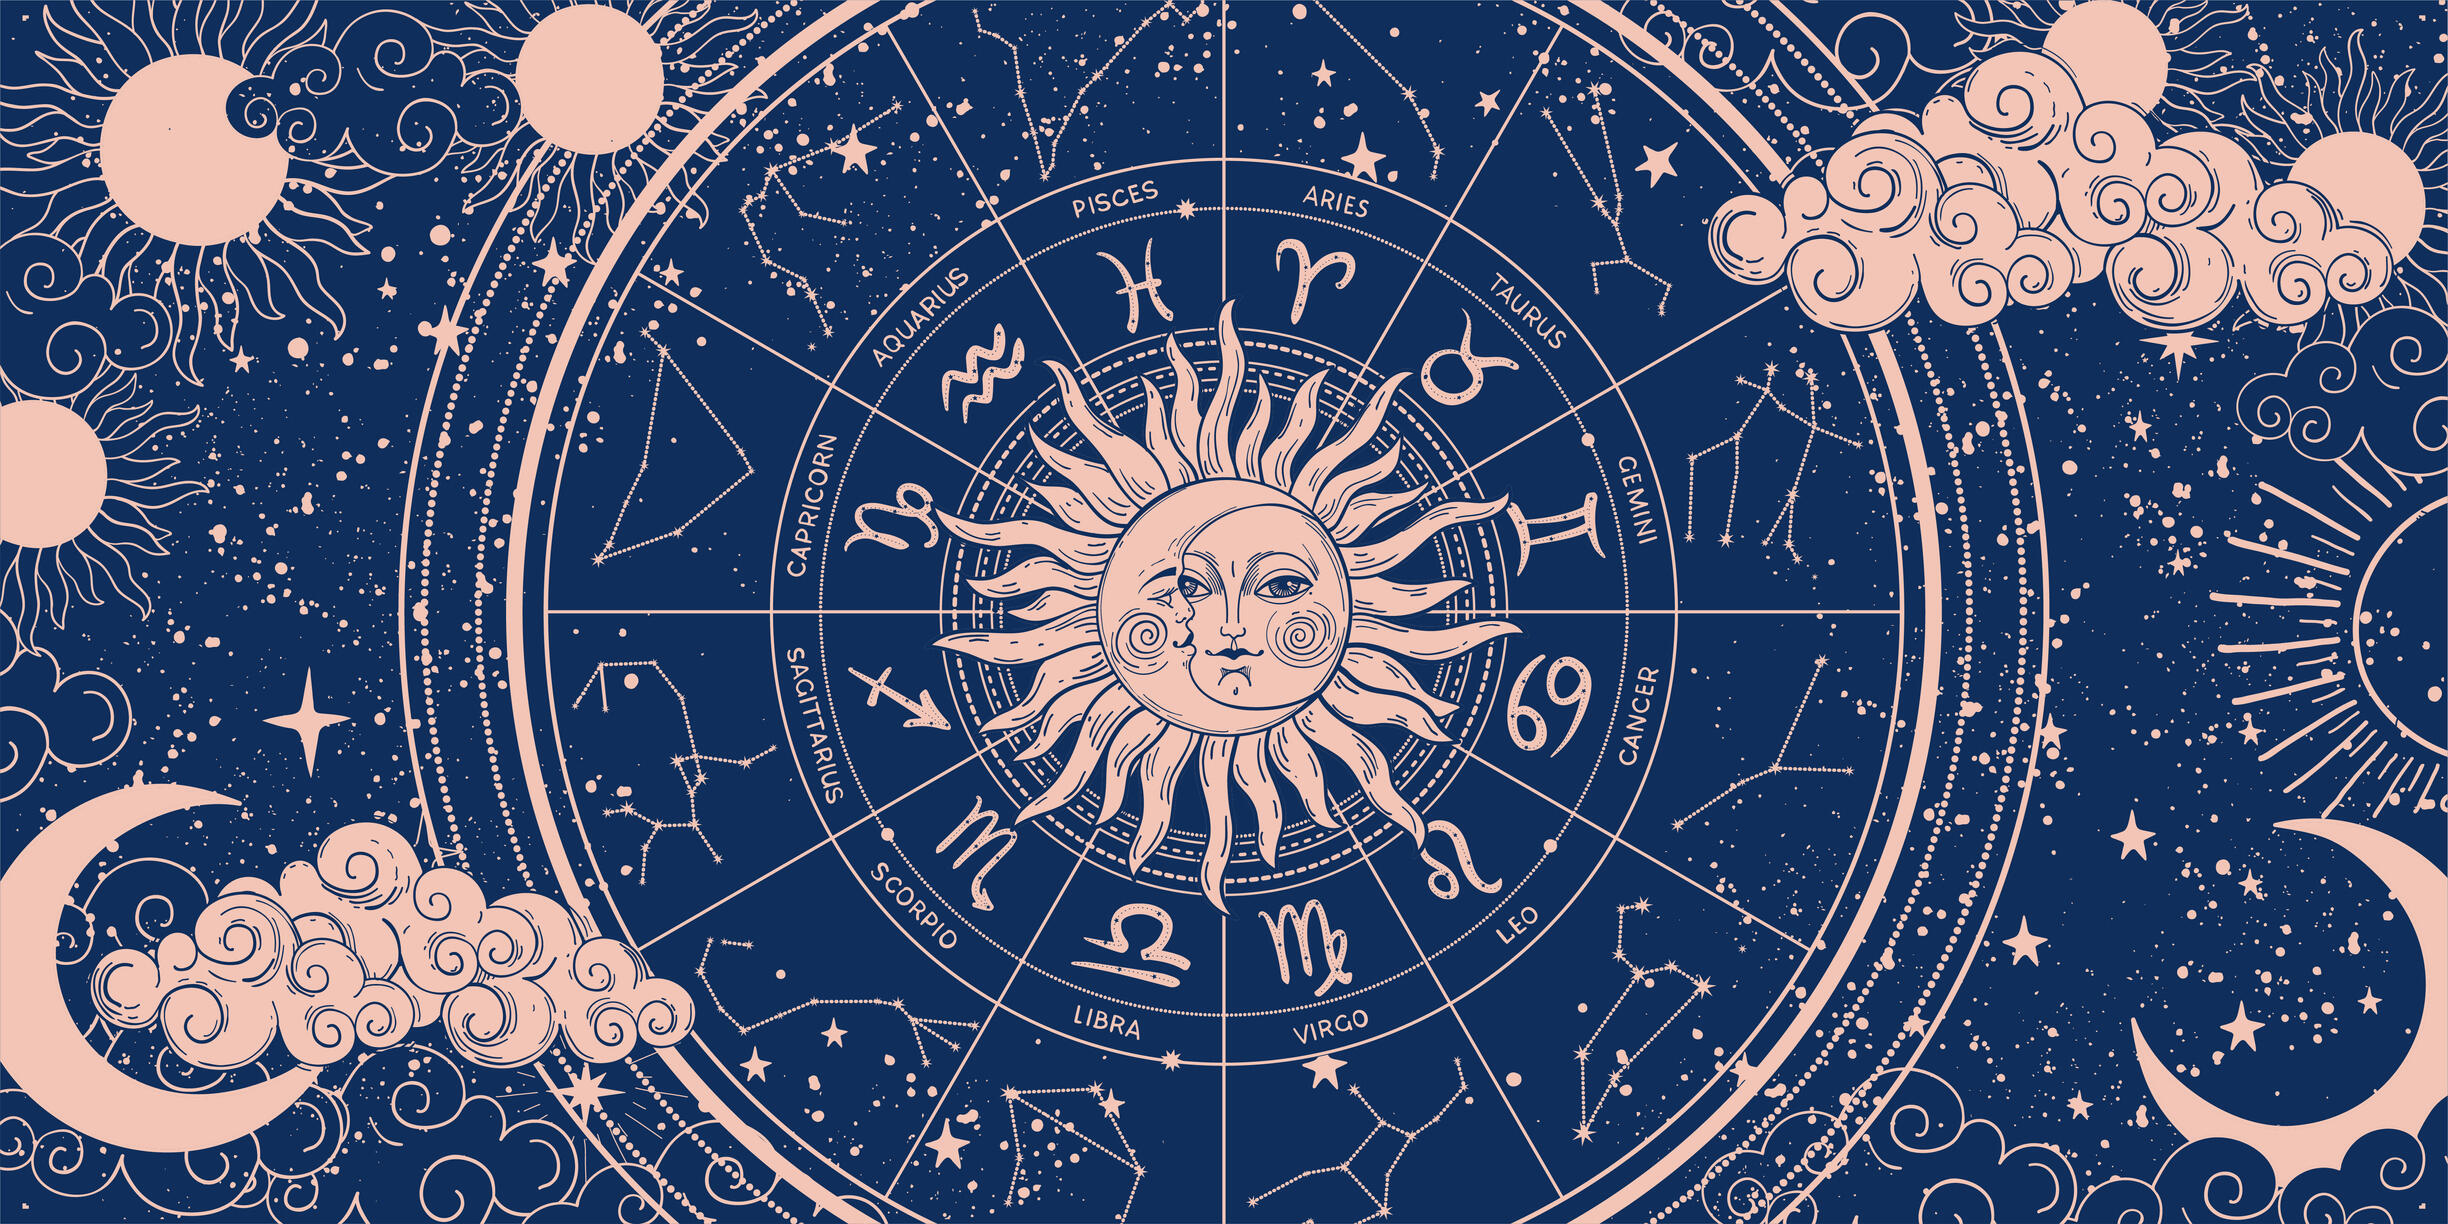 Your Daily Horoscope: Here's What's In Store For March 28th